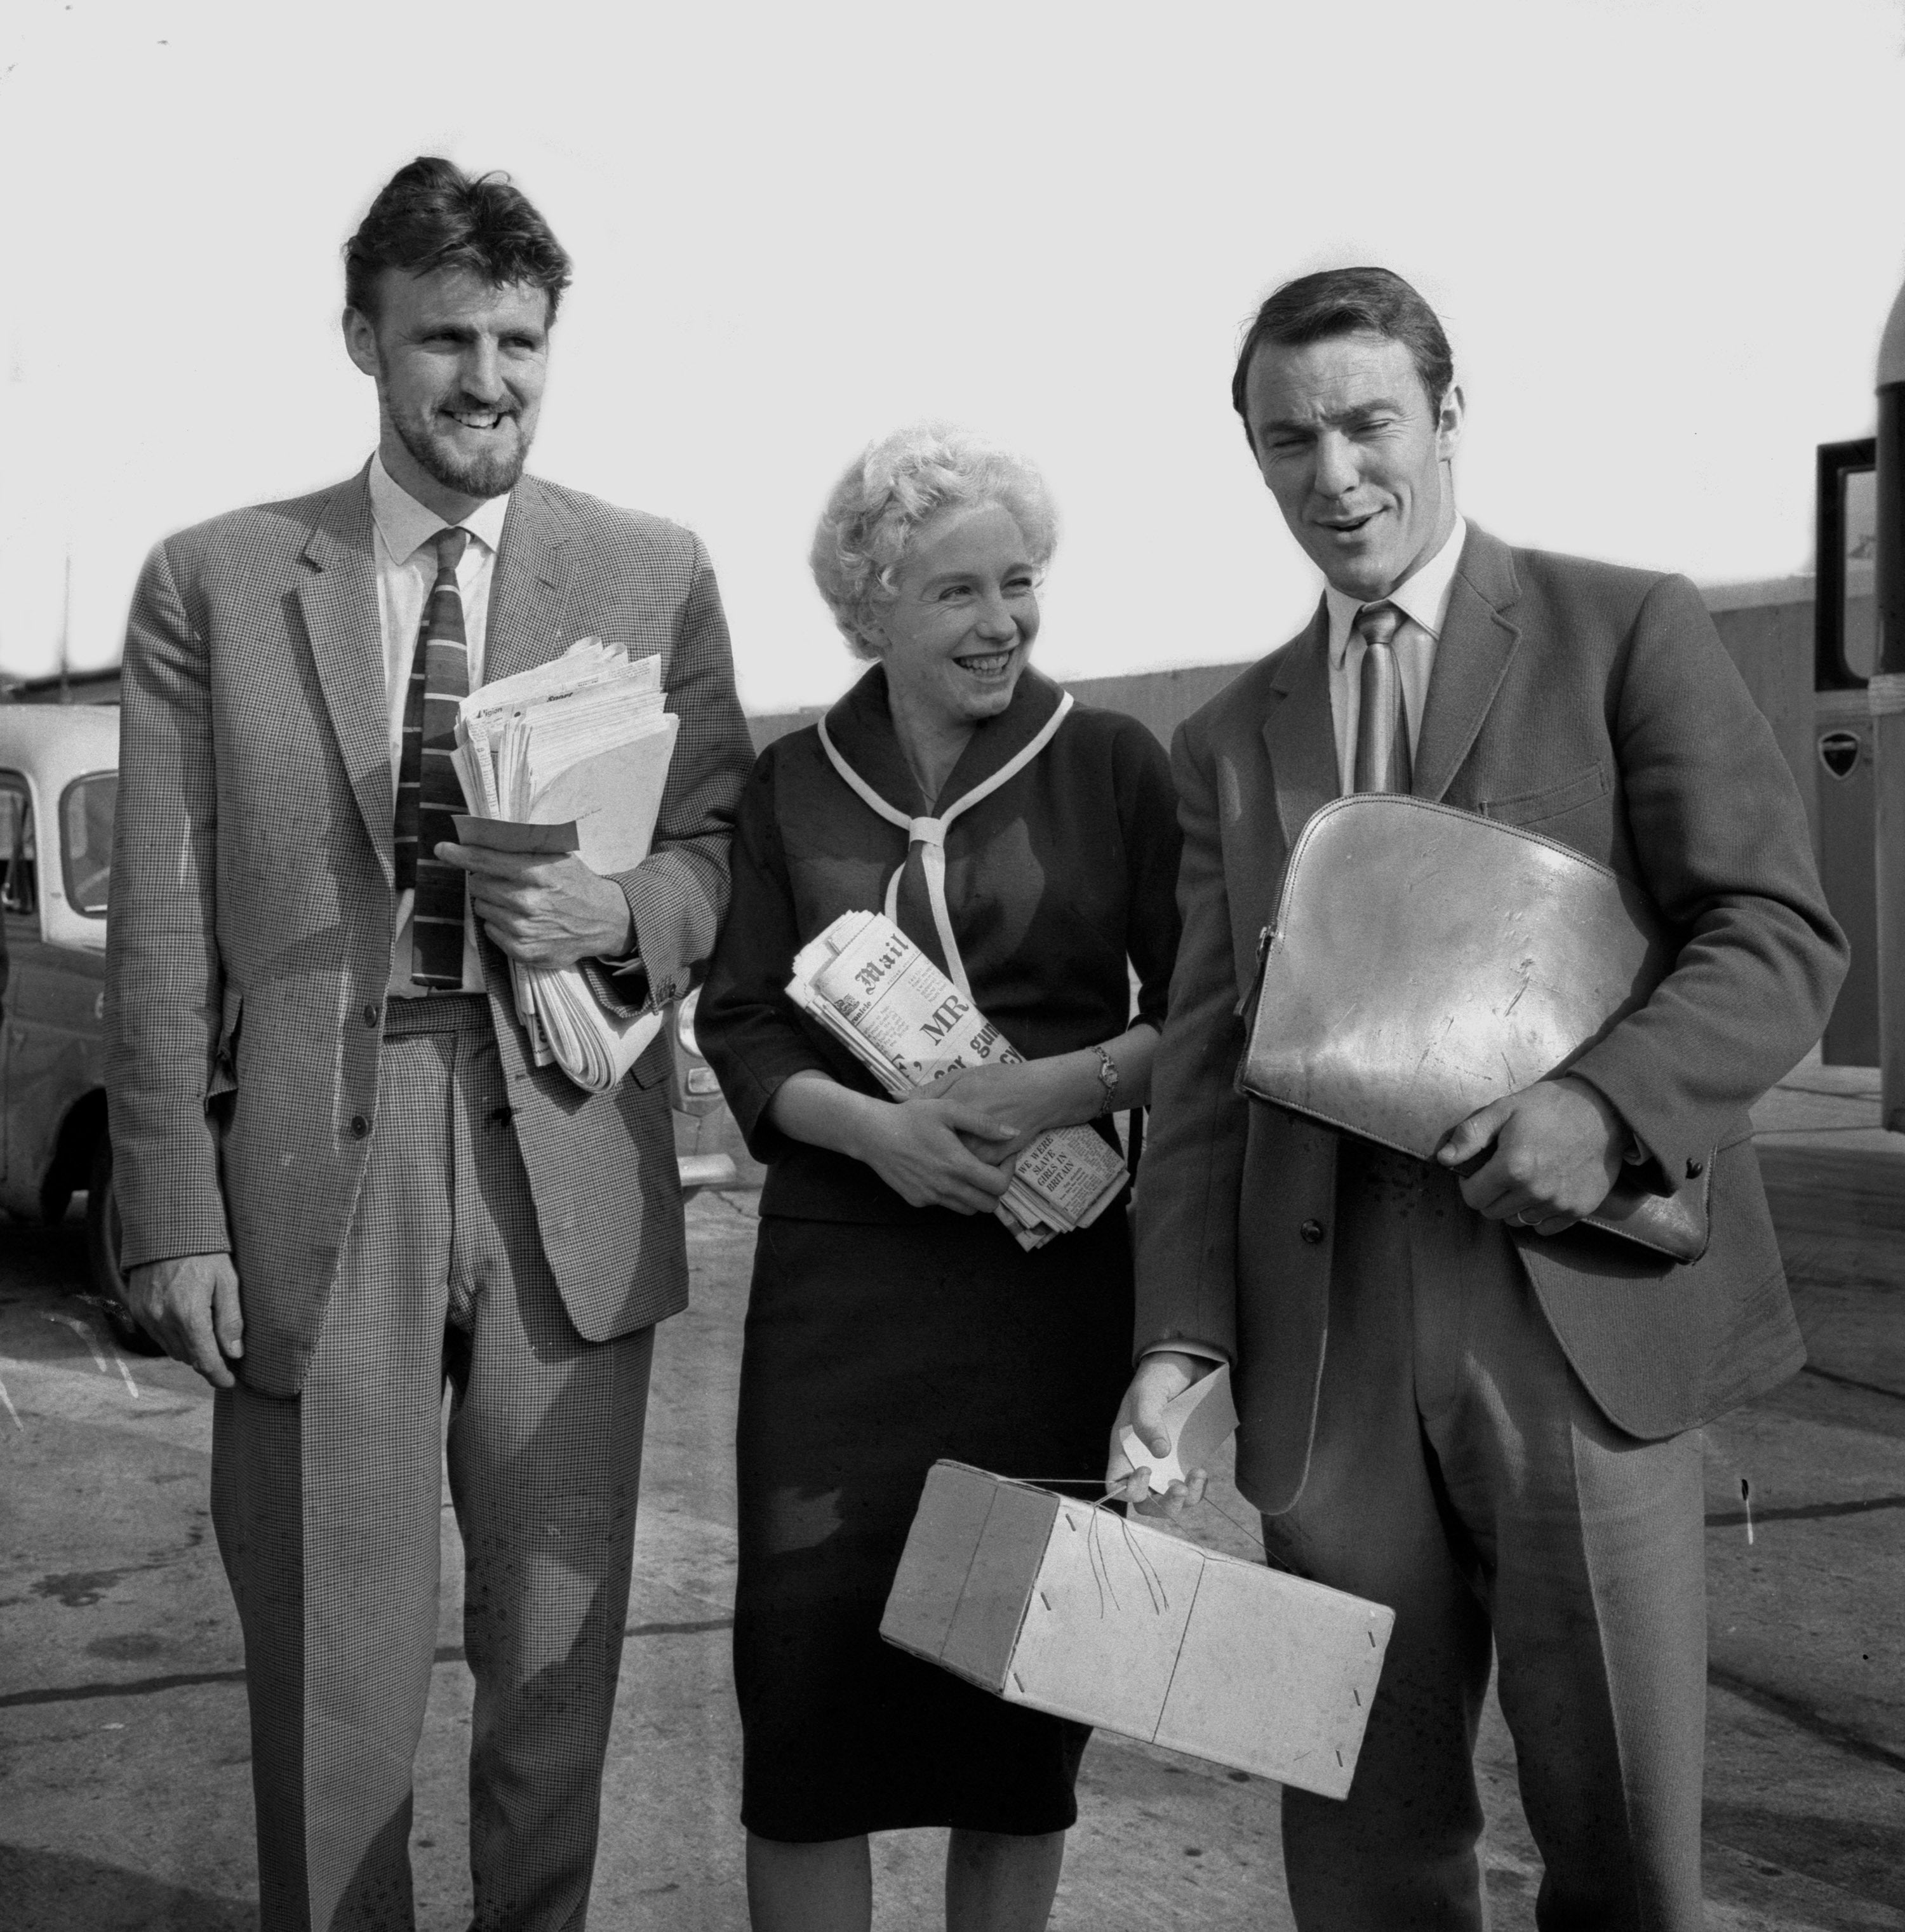 Jimmy Greaves at London Airport with his wife Irene and PFA chairman Jimmy Hill ahead of his move to AC Milan in the summer of 1961 (PA)